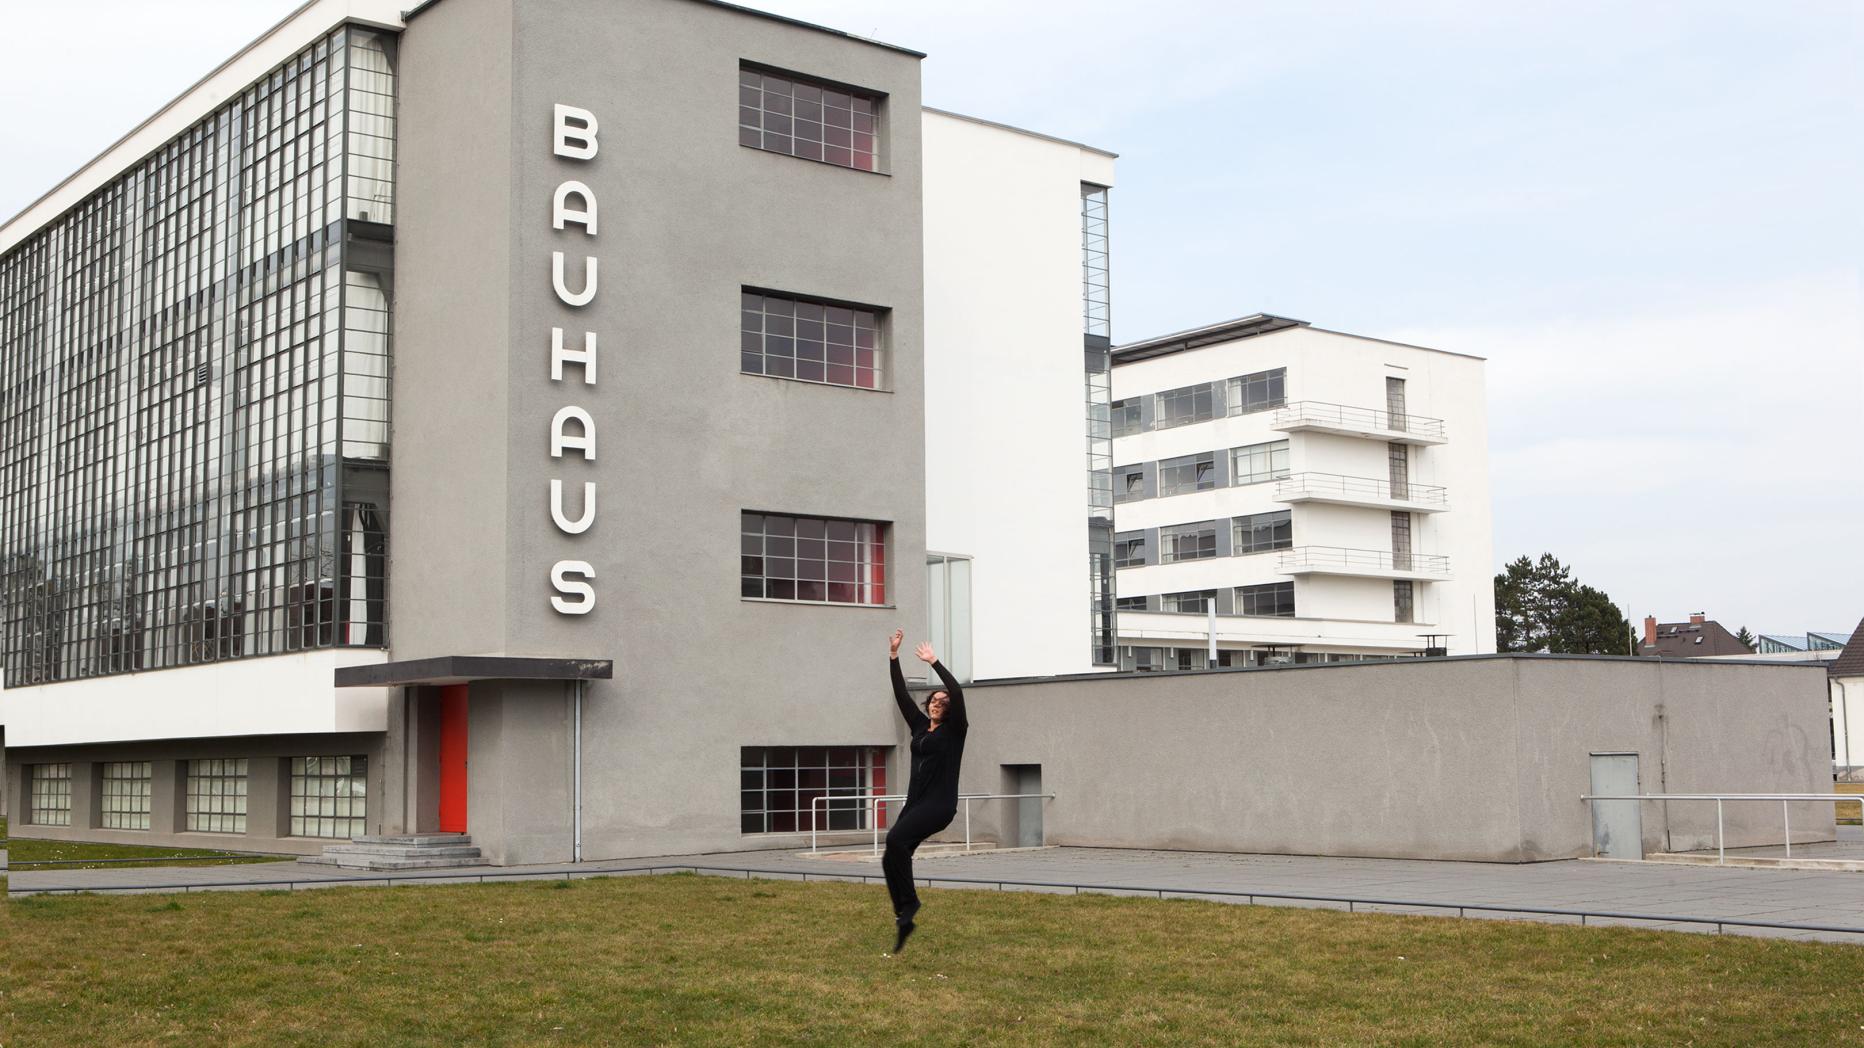 A single performer outside with a building called "Bauhaus"  in the background